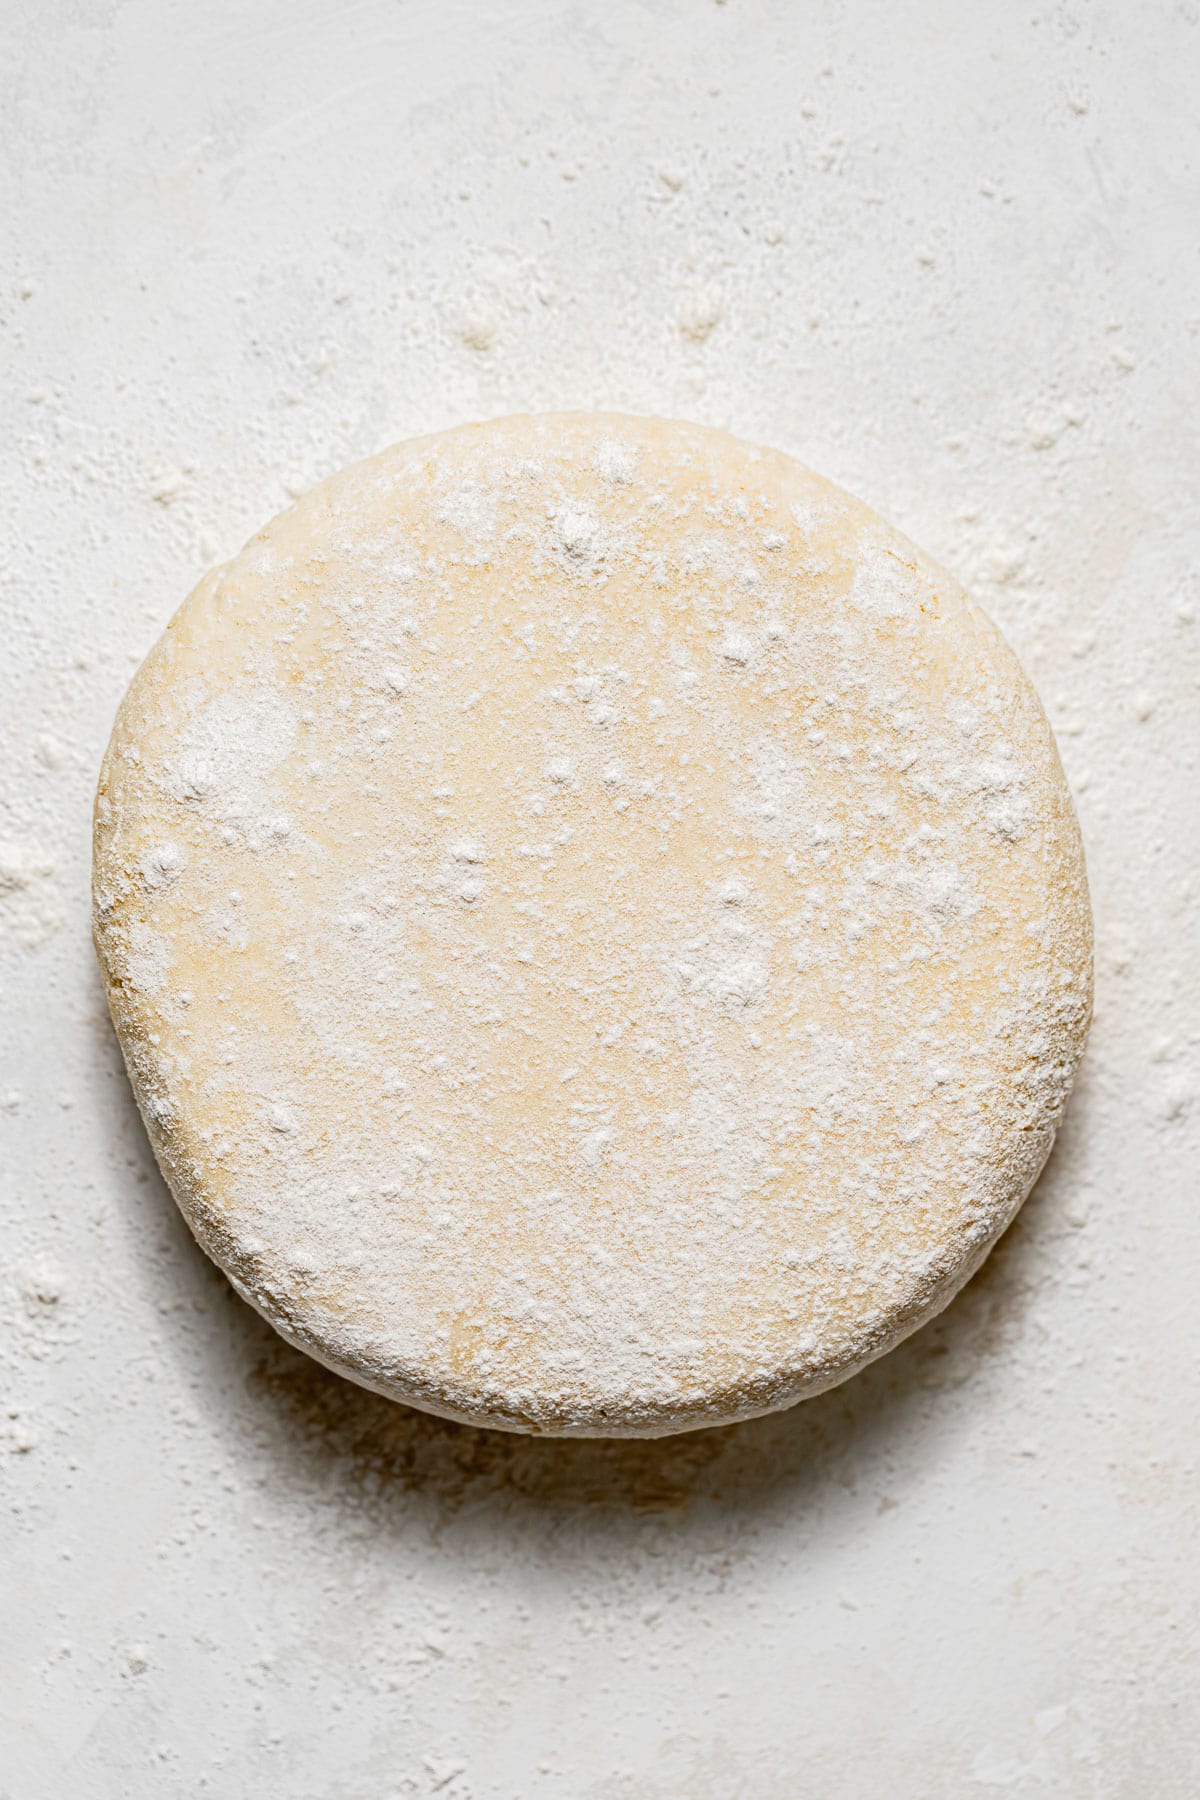 pie dough shaped into disk with flour on top.